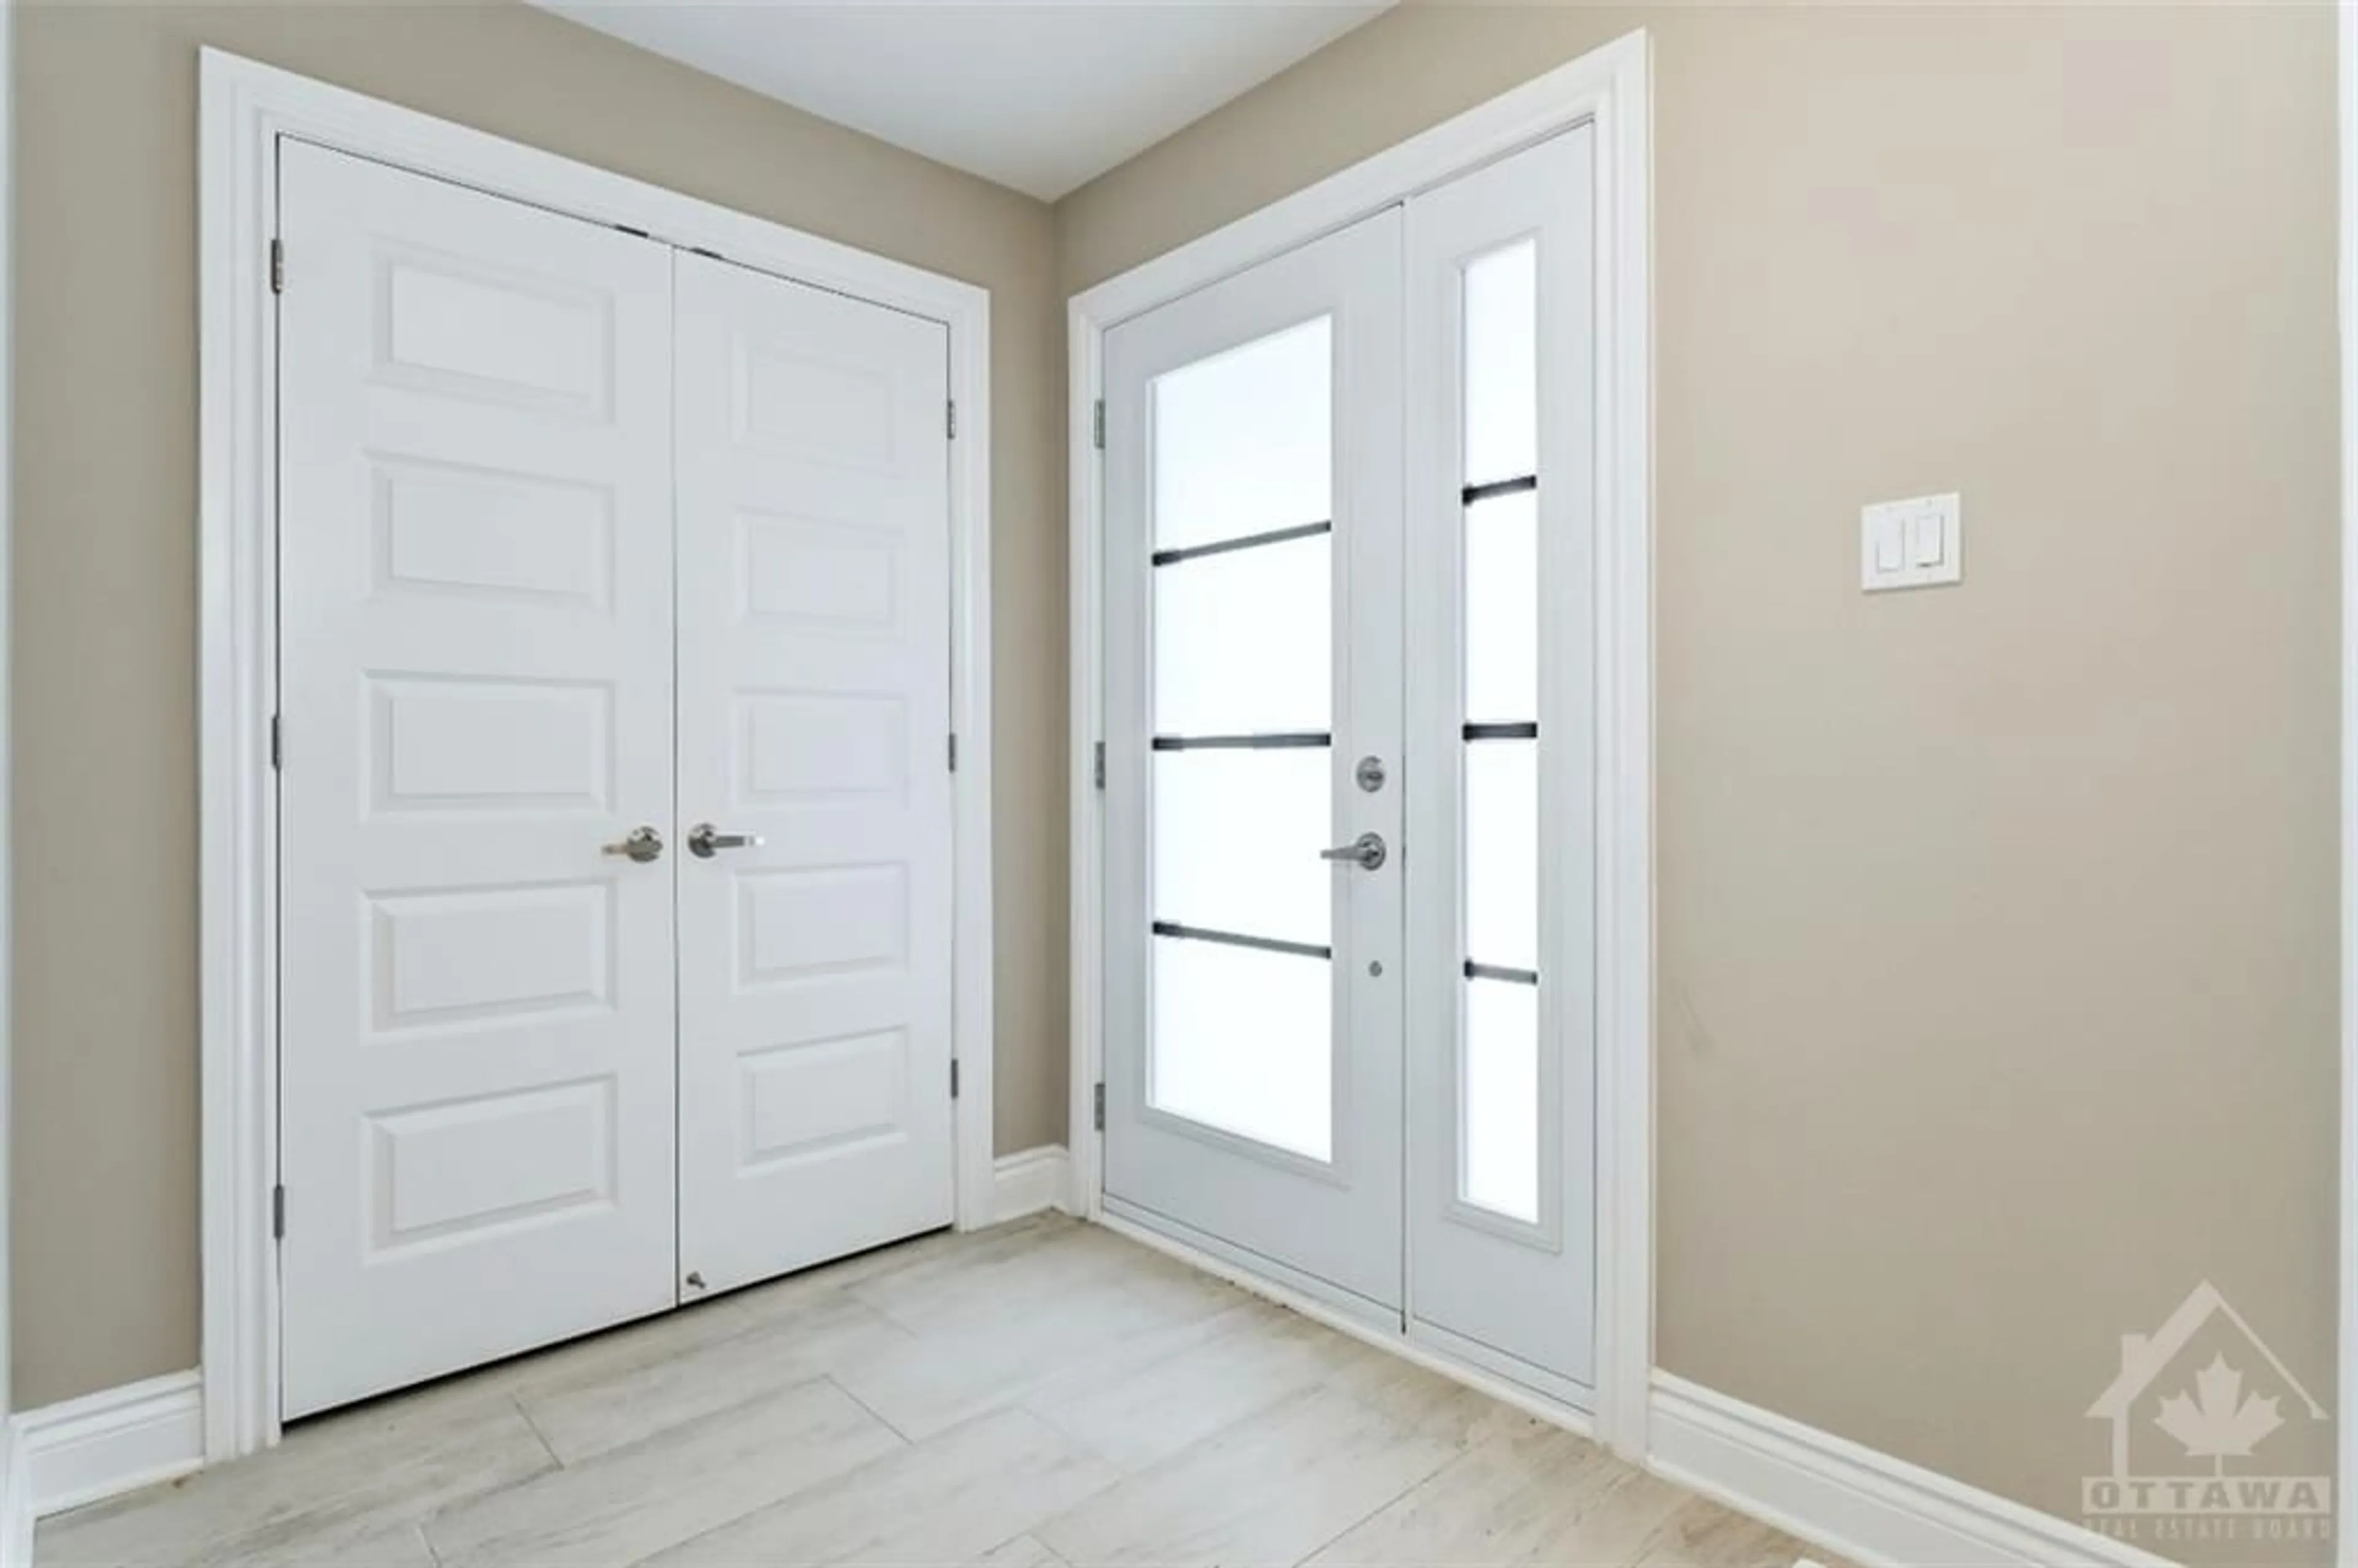 Indoor entryway for 169 DARQUISE St, Rockland Ontario K4K 0M2